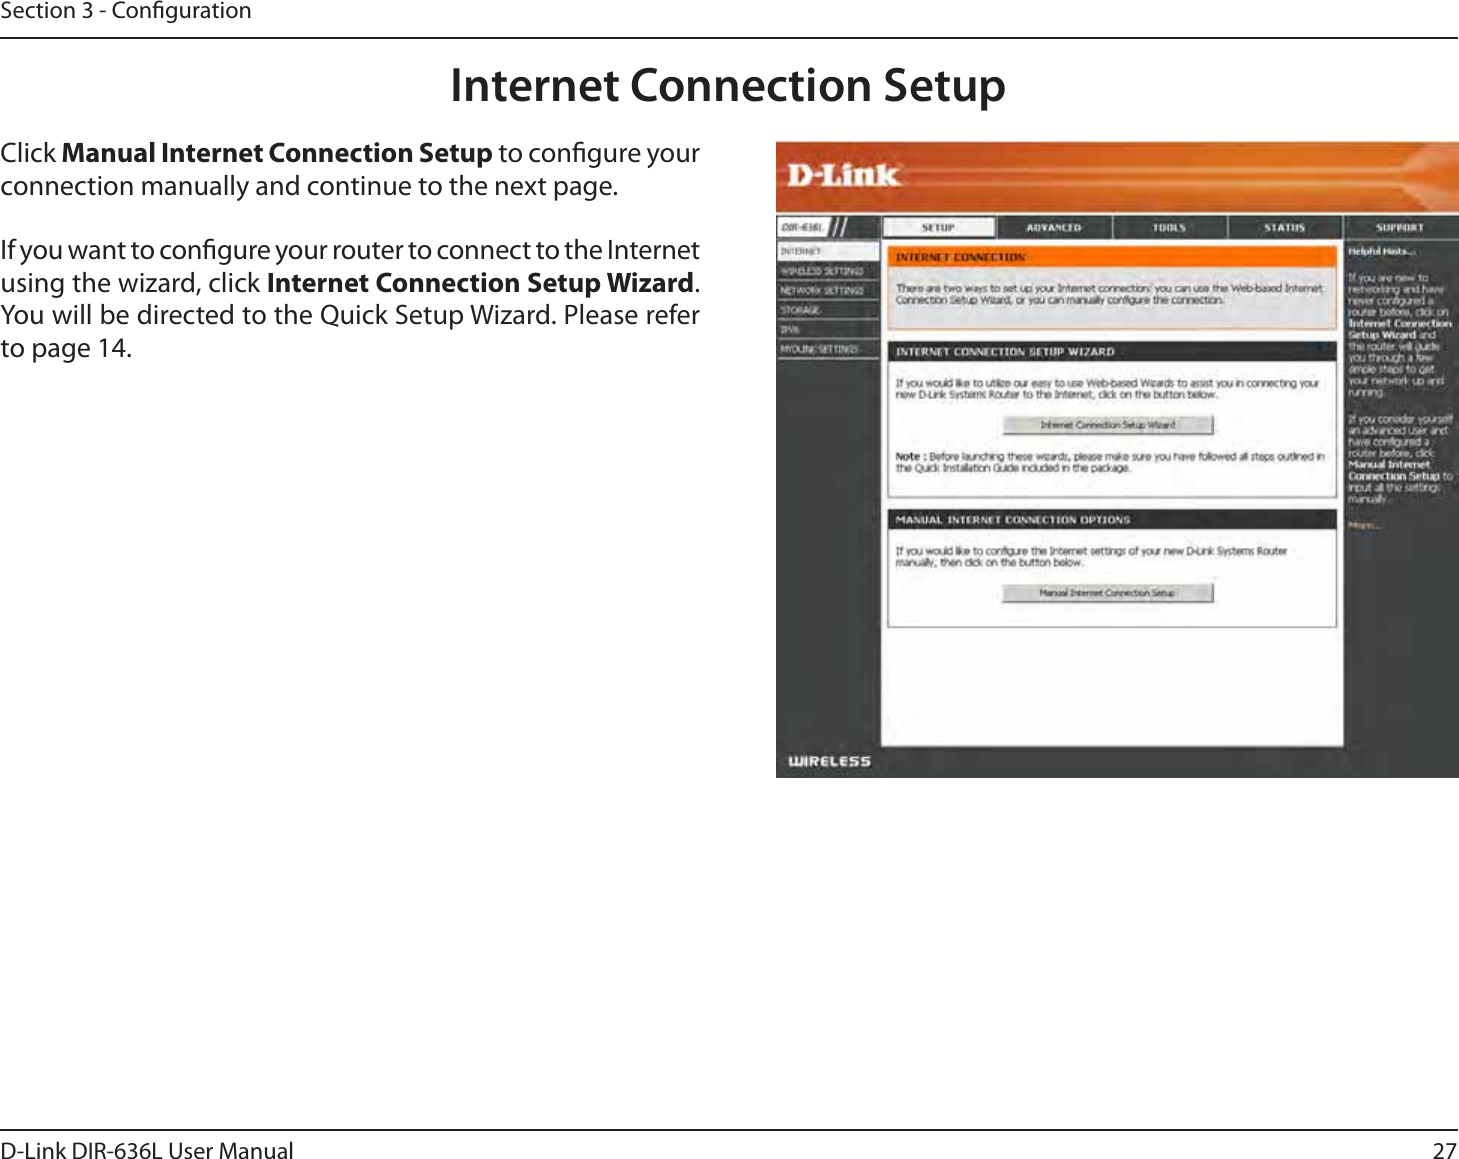 27D-Link DIR-636L User ManualSection 3 - CongurationInternet Connection SetupClick Manual Internet Connection Setup to congure your connection manually and continue to the next page.If you want to congure your router to connect to the Internet using the wizard, click Internet Connection Setup Wizard. You will be directed to the Quick Setup Wizard. Please refer to page 14.